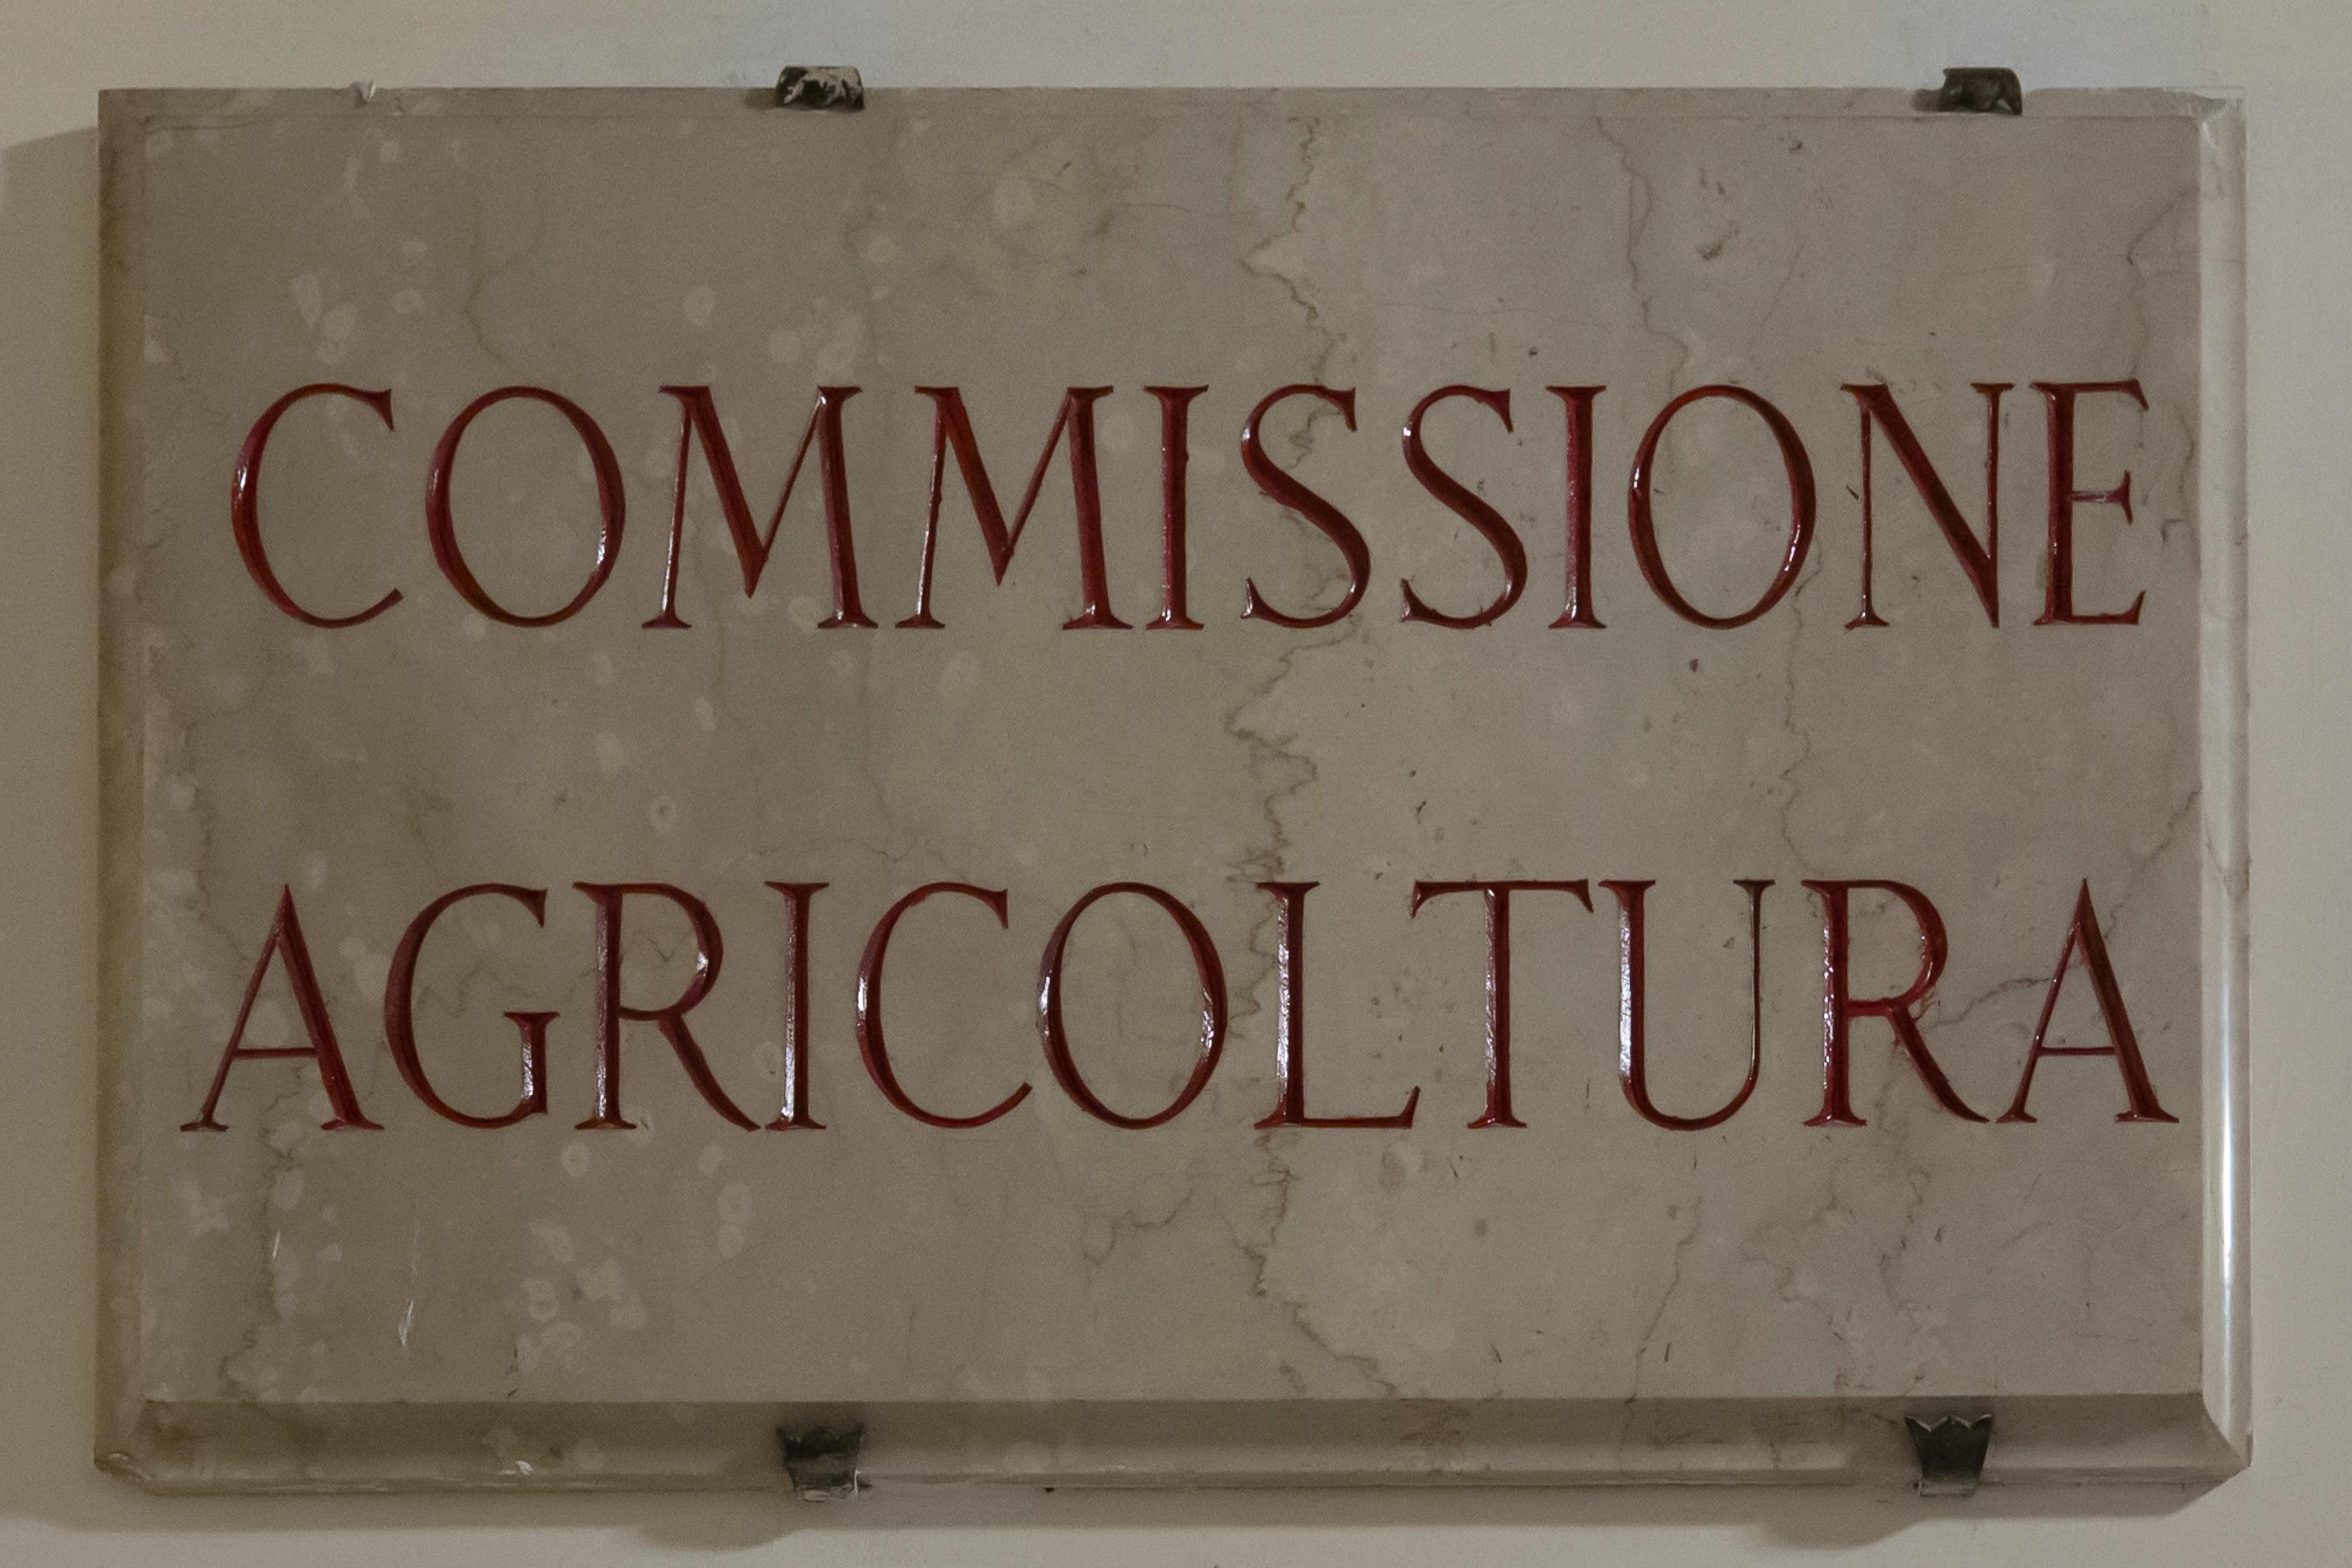 XIII Commissione Agricoltura